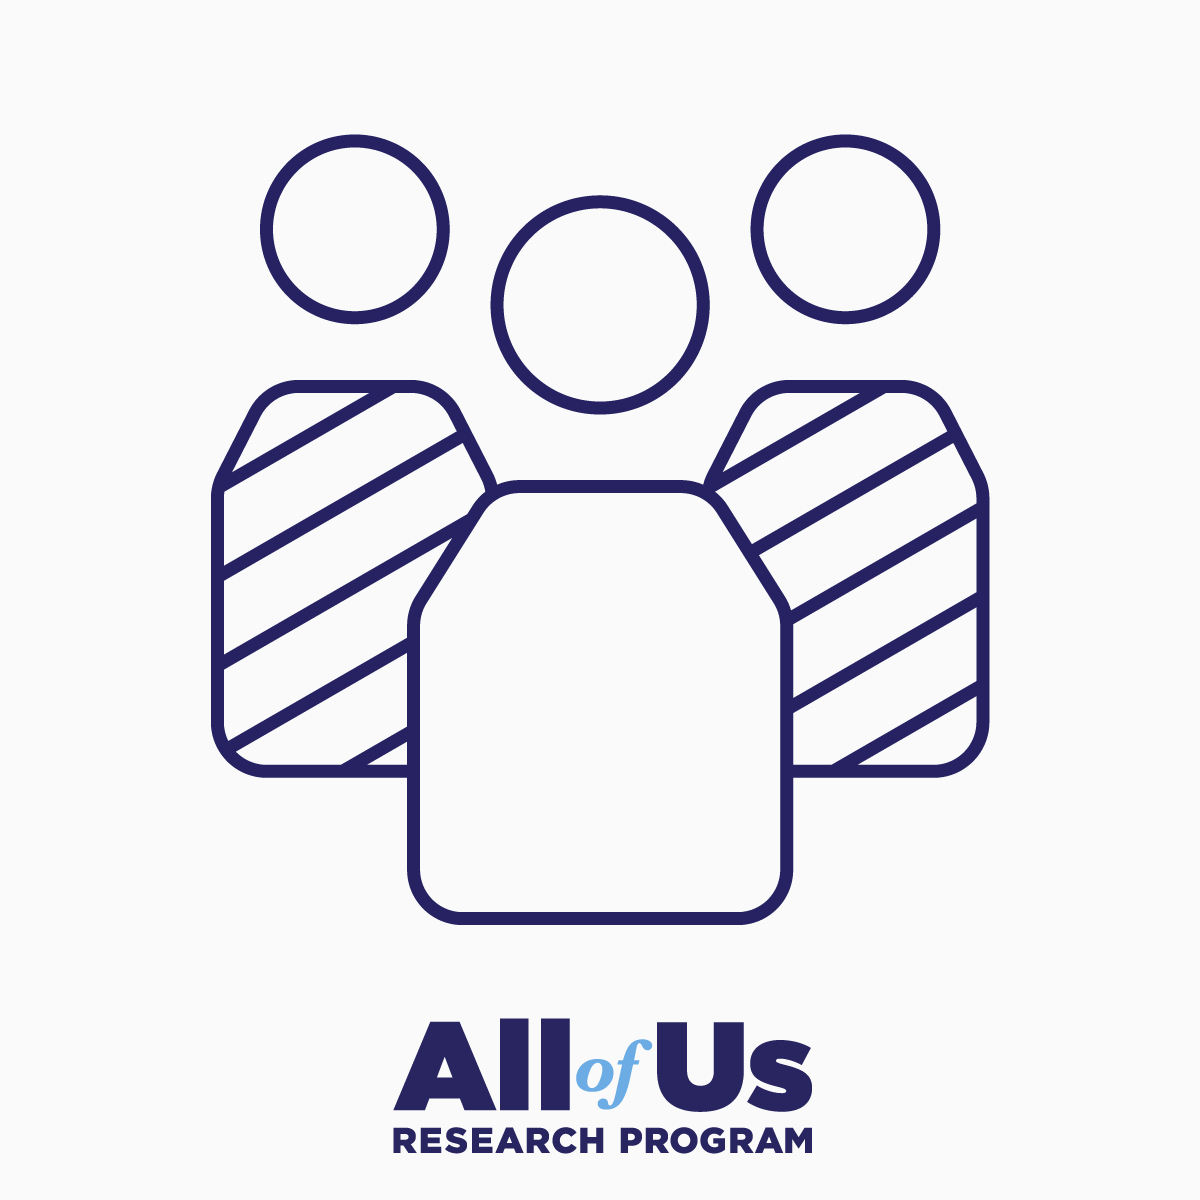 Placeholder image showing a graphical representation of three people above the All of Us Research Program logo